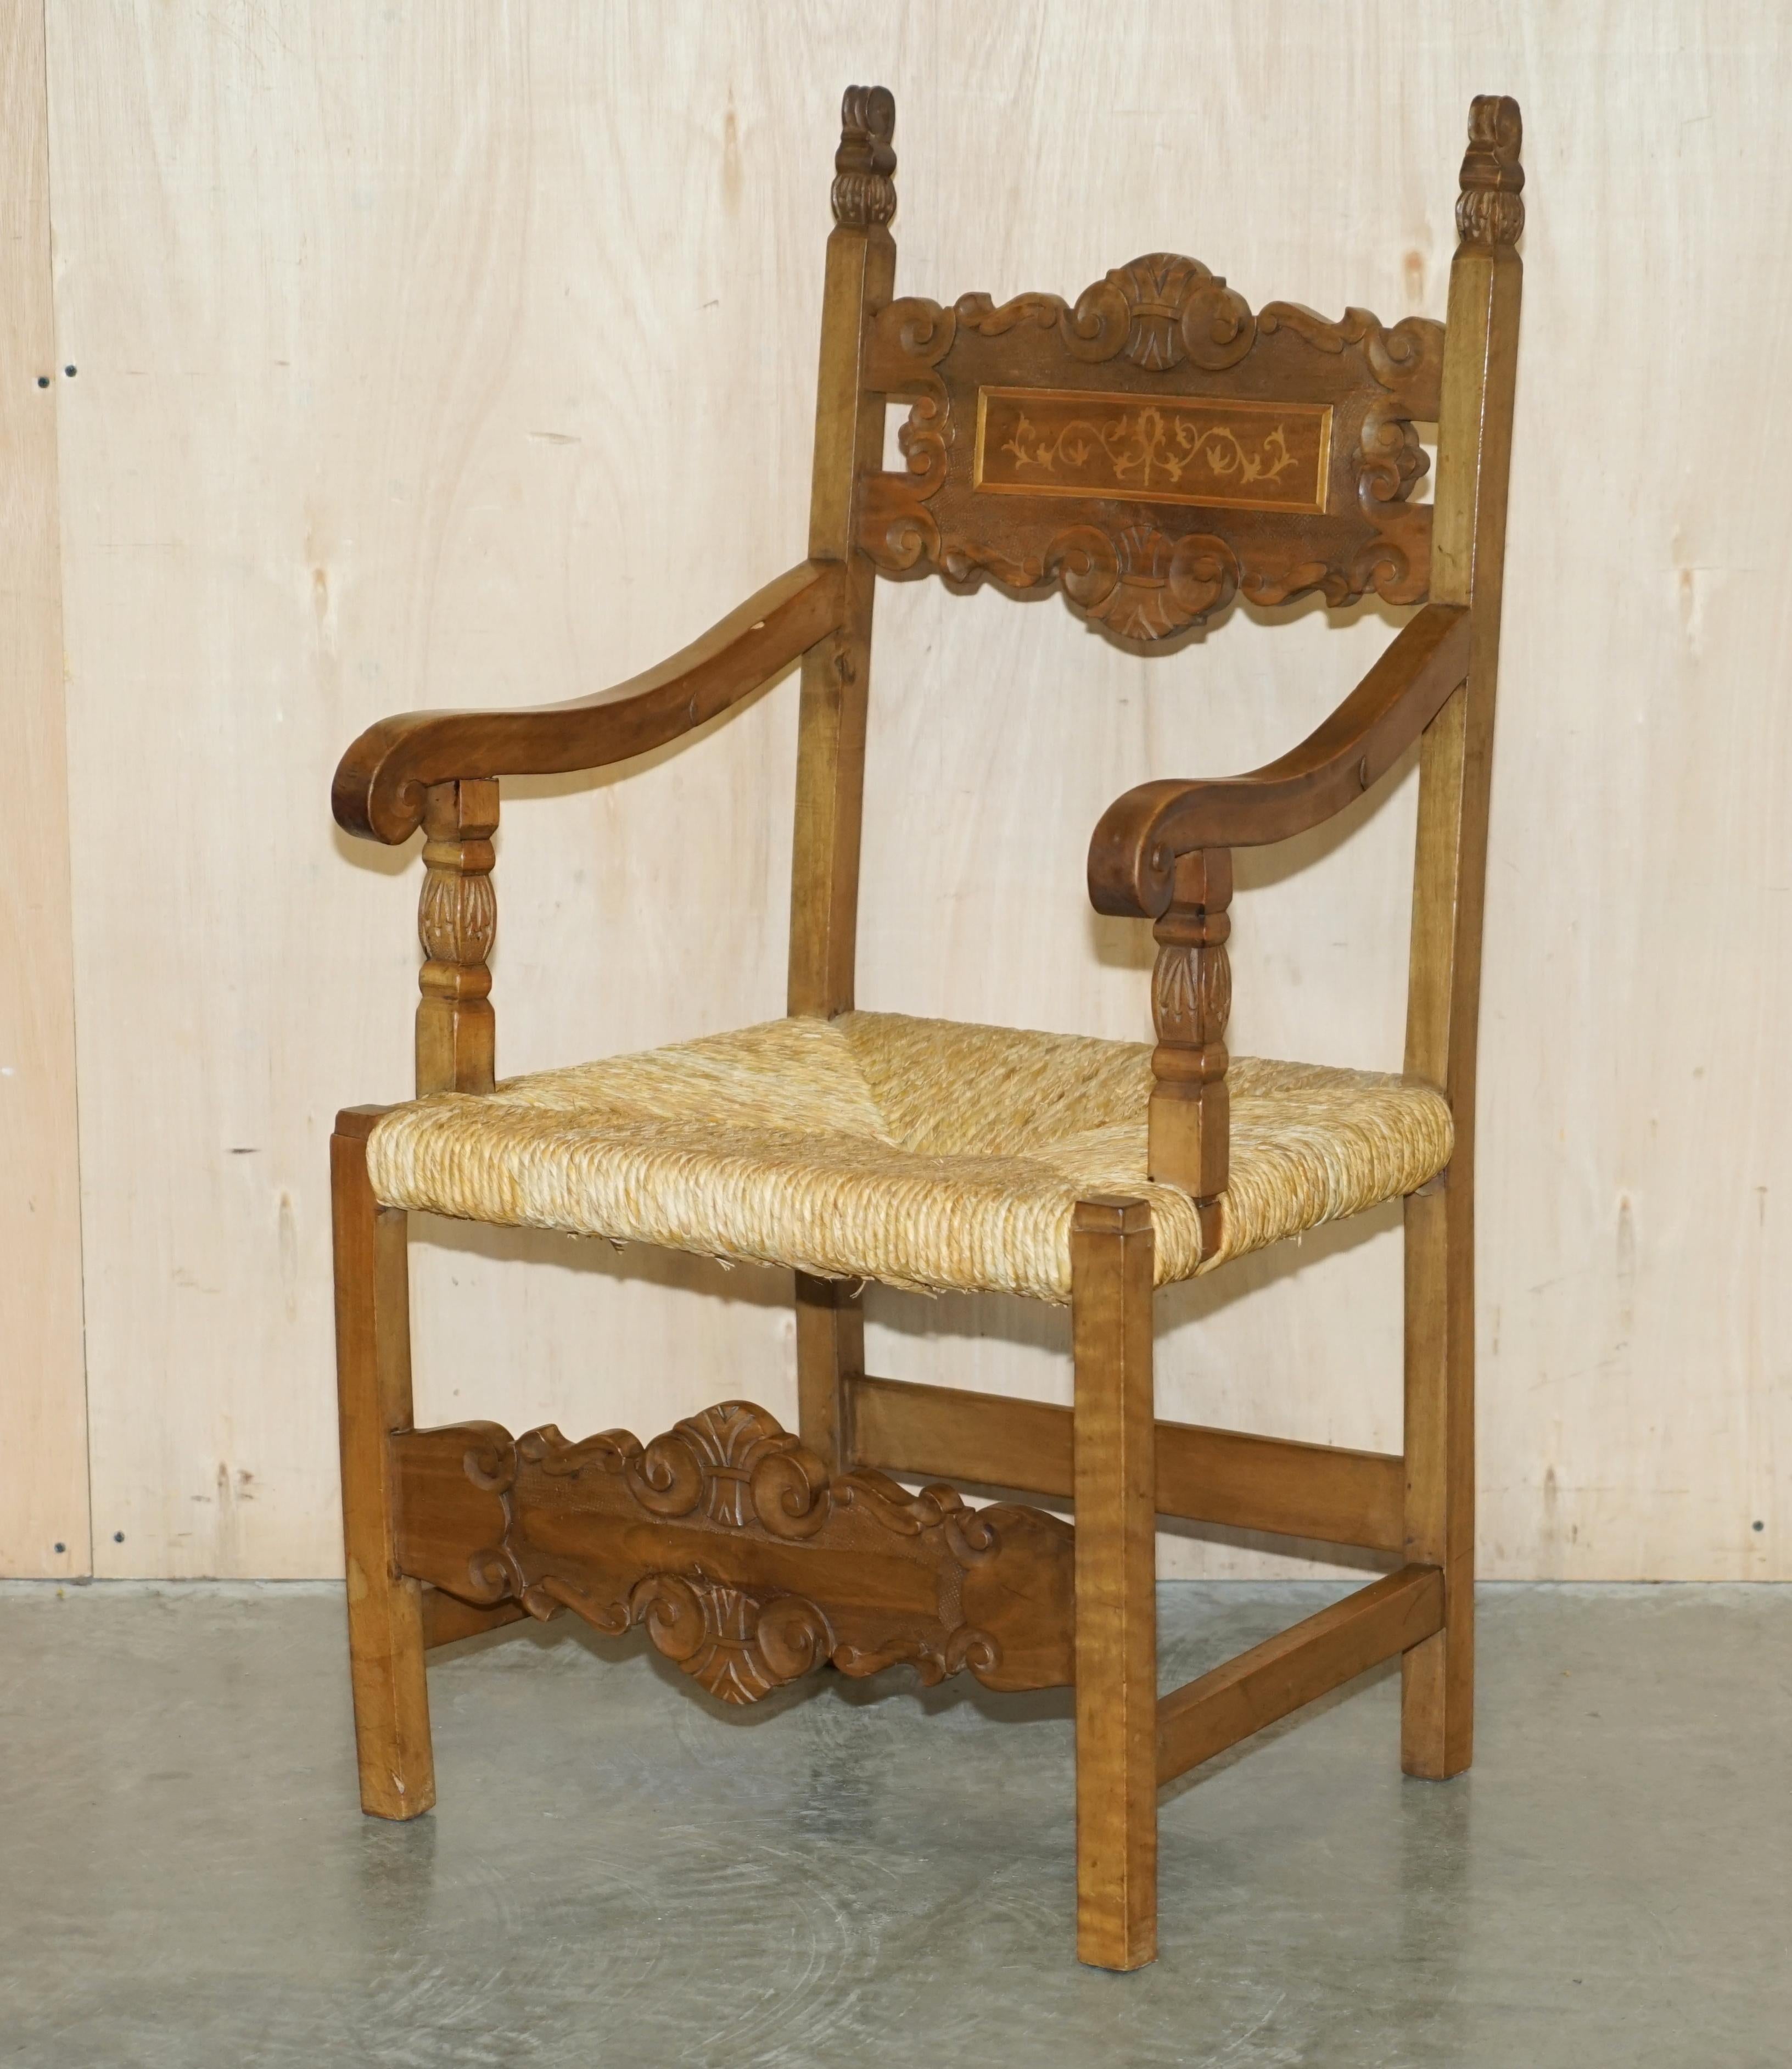 We are delighted to offer for sale this lovely suite of eight original Dutch circa 1900 hand carved Walnut, rush seat dining chairs.

A very good looking and well-made suite, the timber is all solid Walnut and ornately carved, the seats the